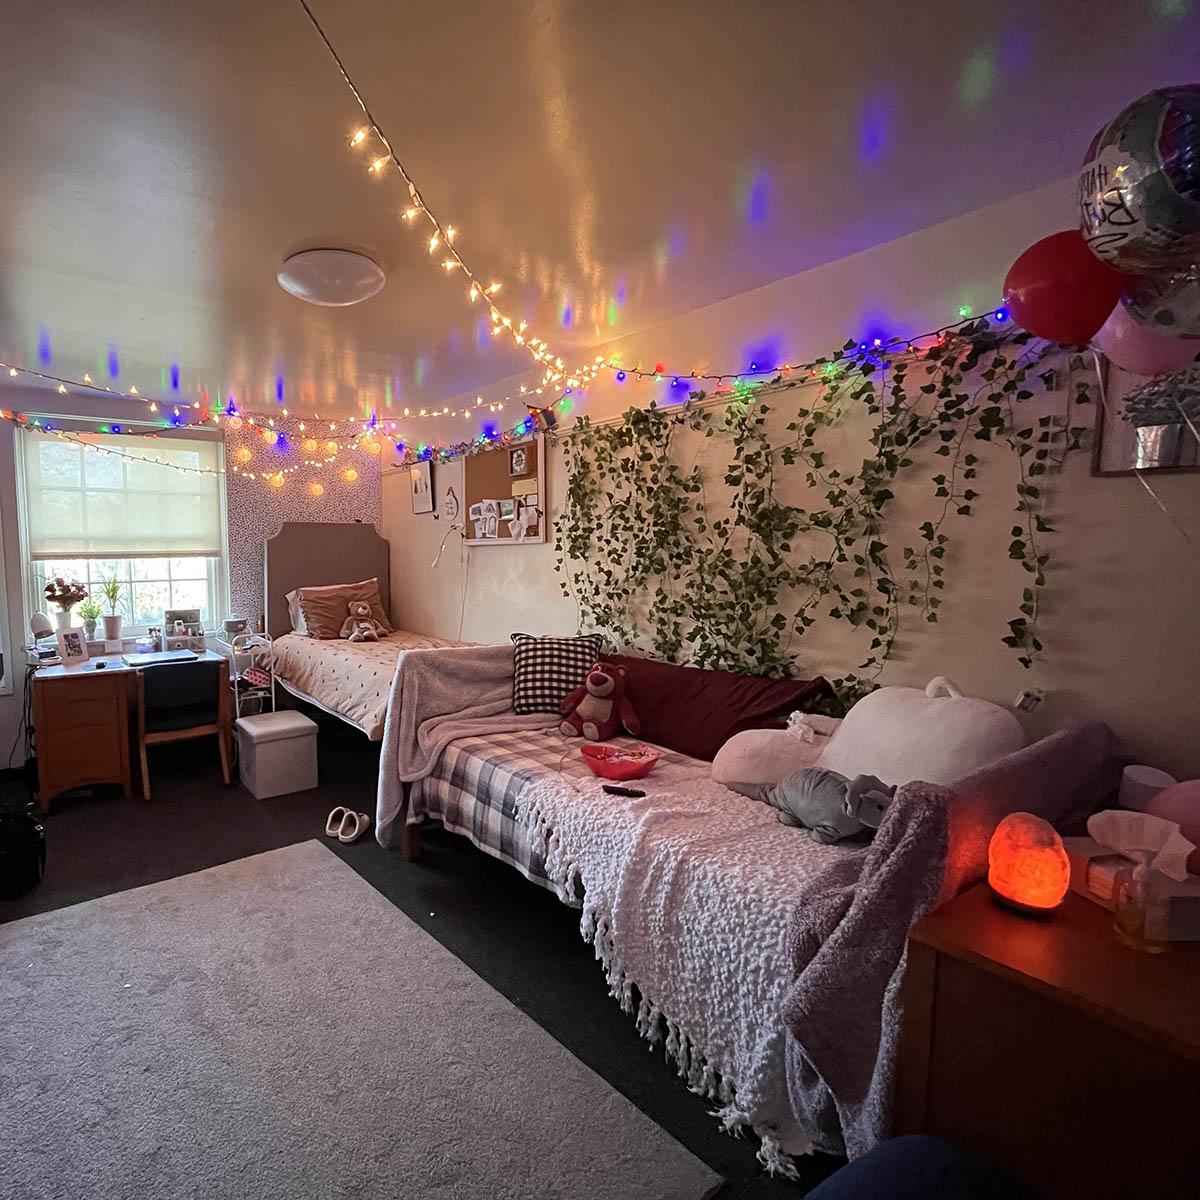 Photo of a decorated dorm room with cozy pillows and blankets and fairy lights